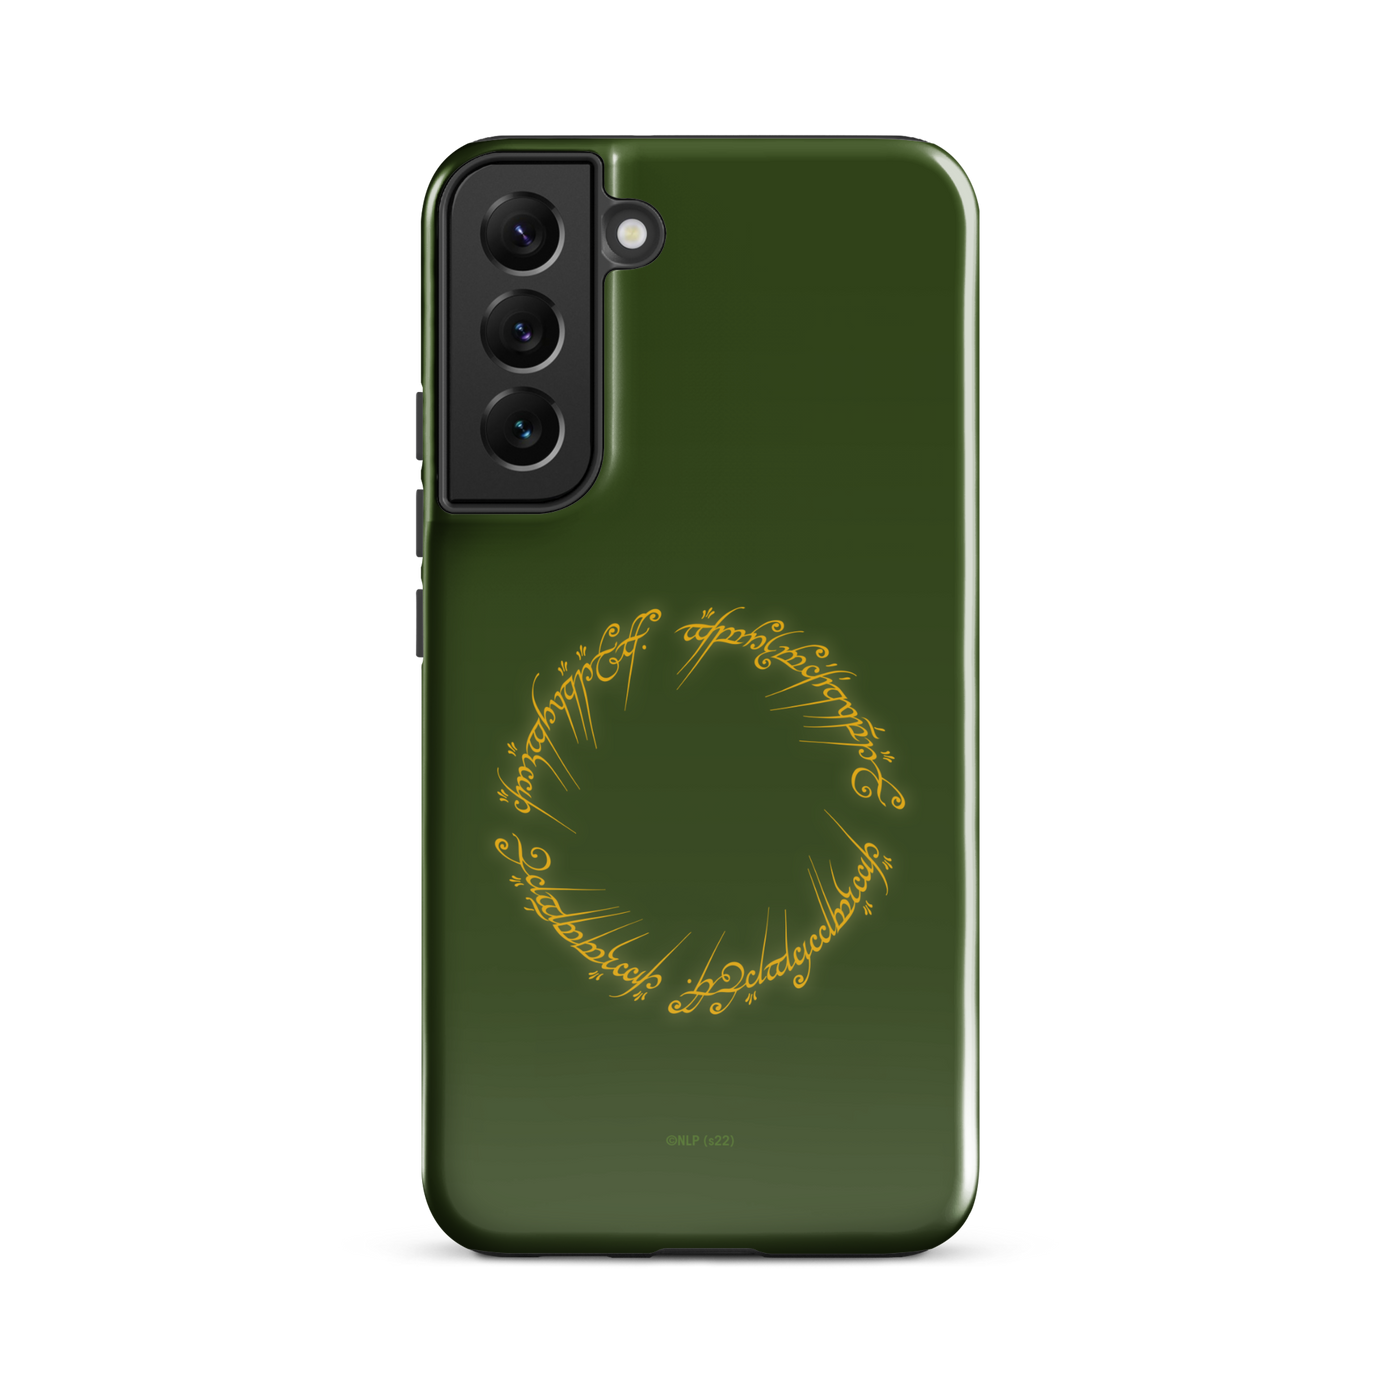 Lord of the Rings One Ring Tough Phone Case - Samsung